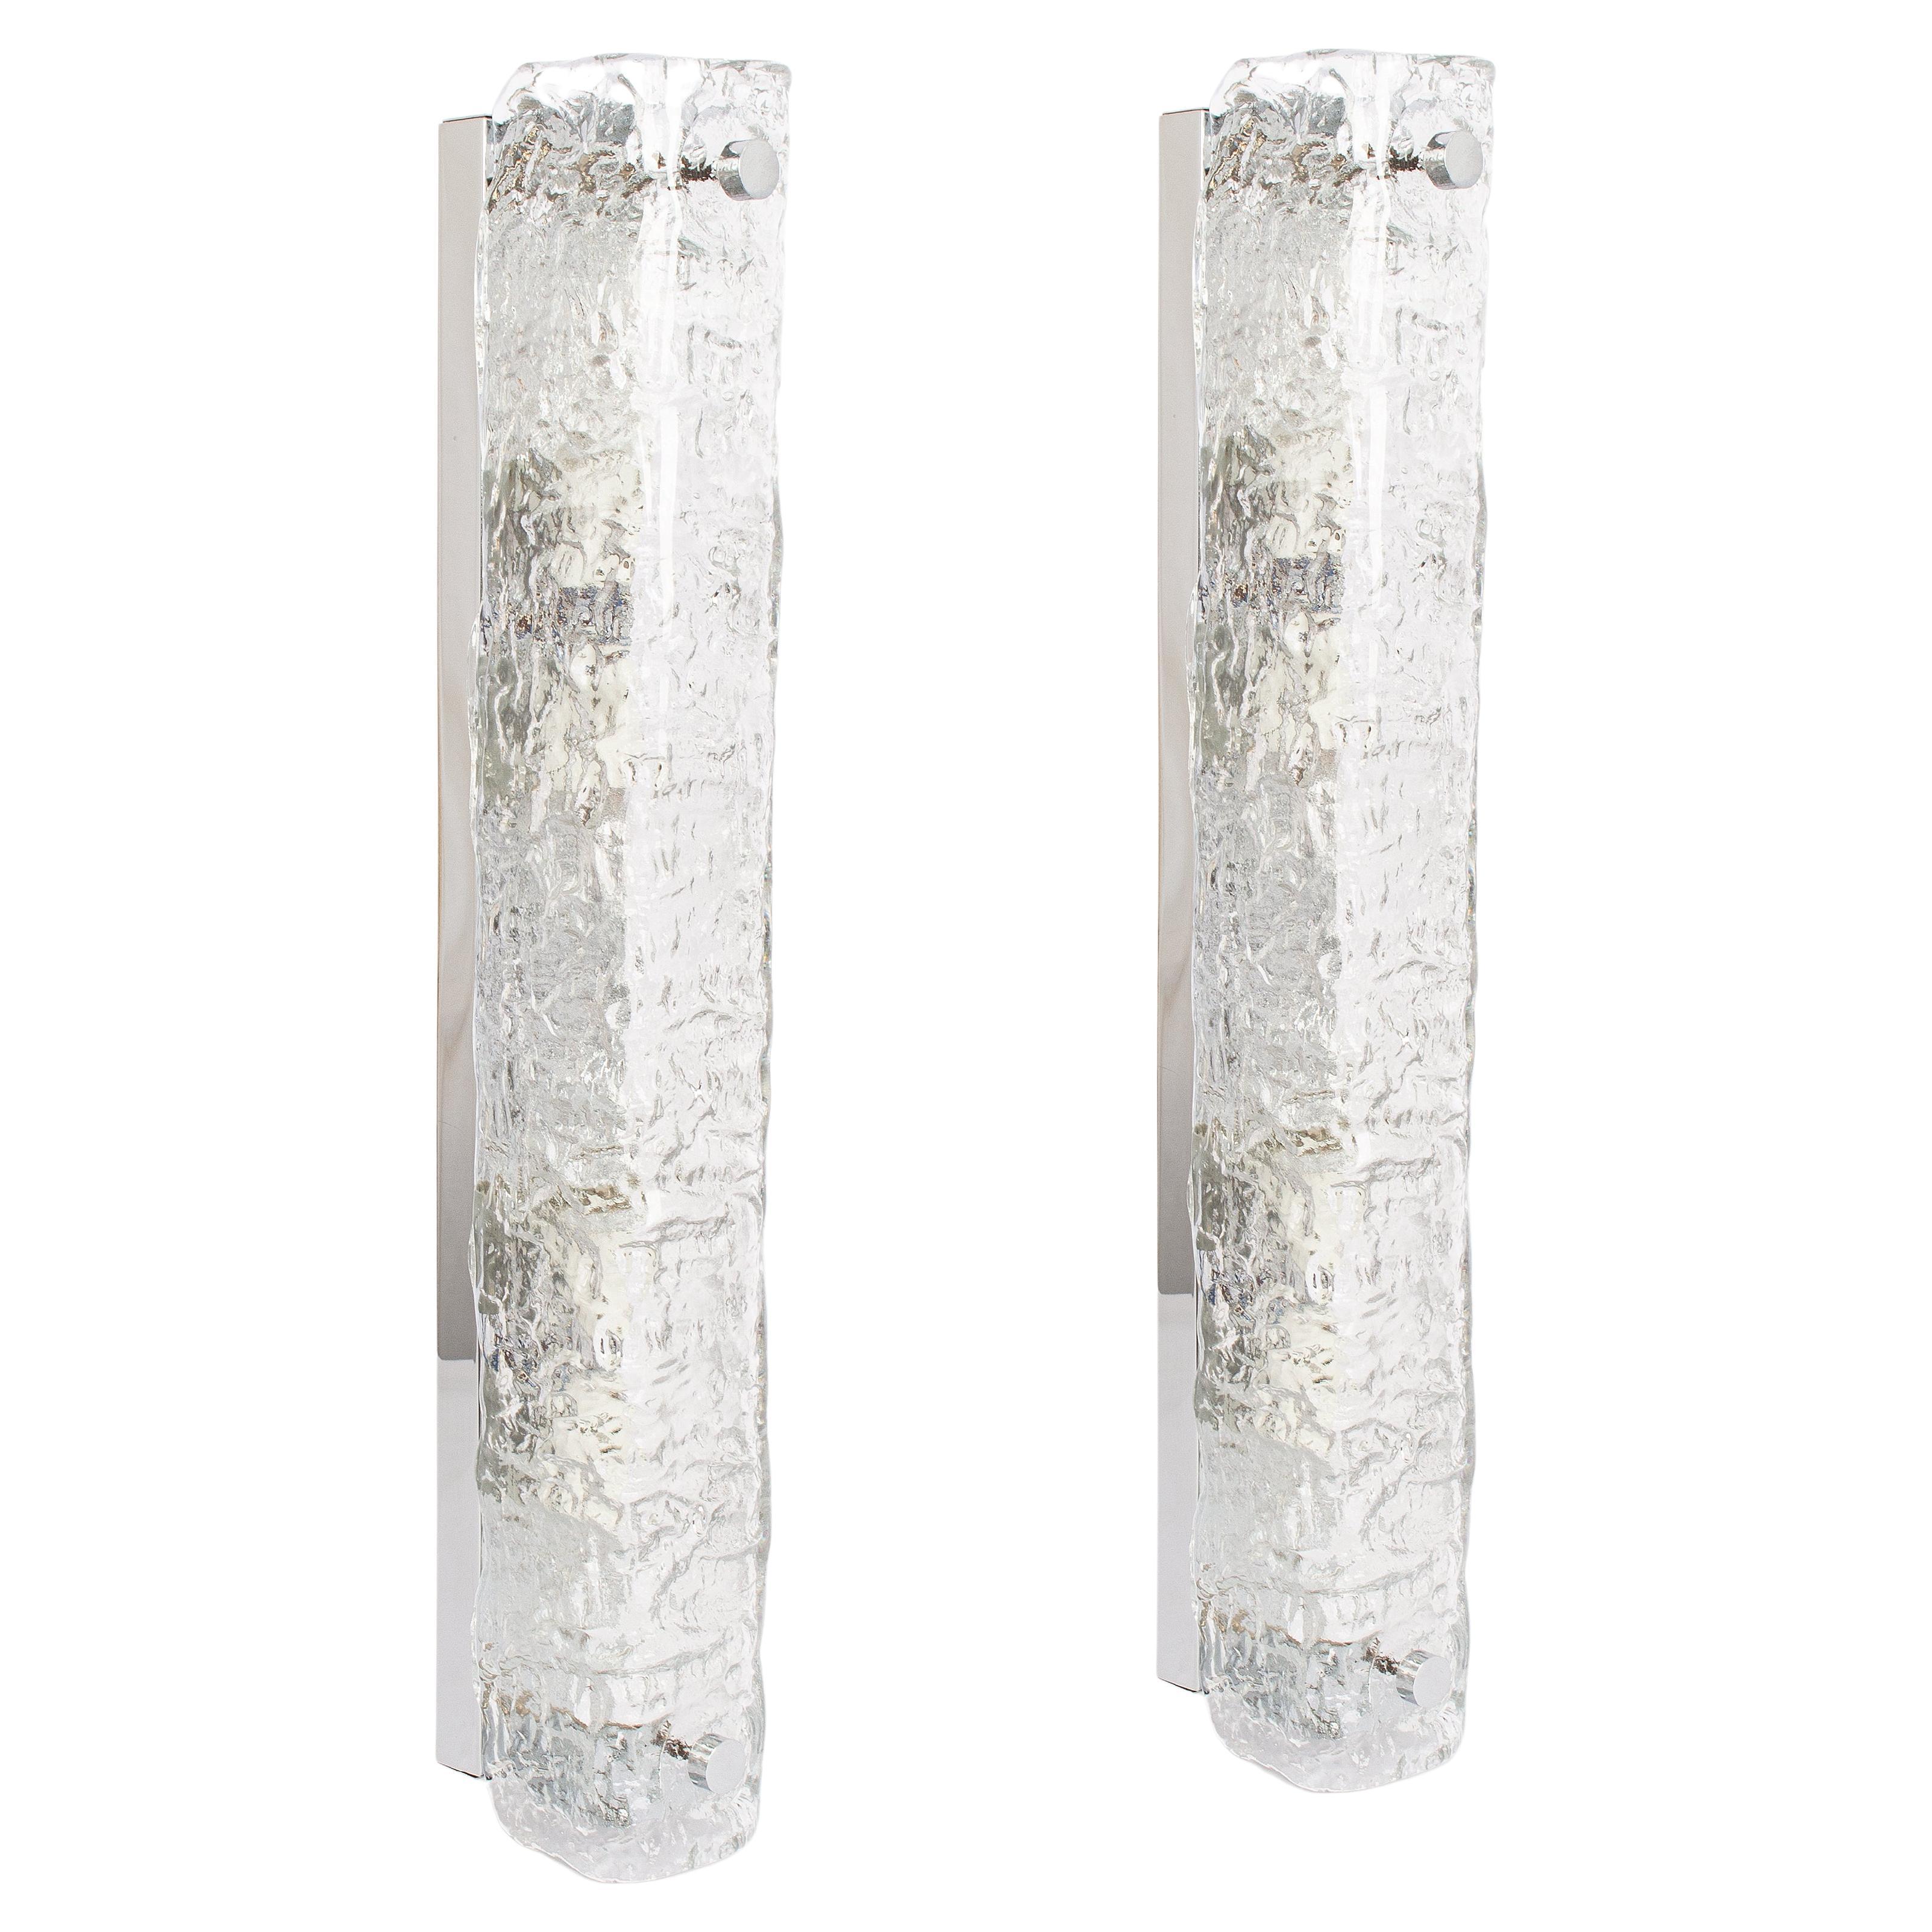 Pair of Large Murano Ice Glass Sconces Modernist Wall Fixtures, Germany, 1960s For Sale